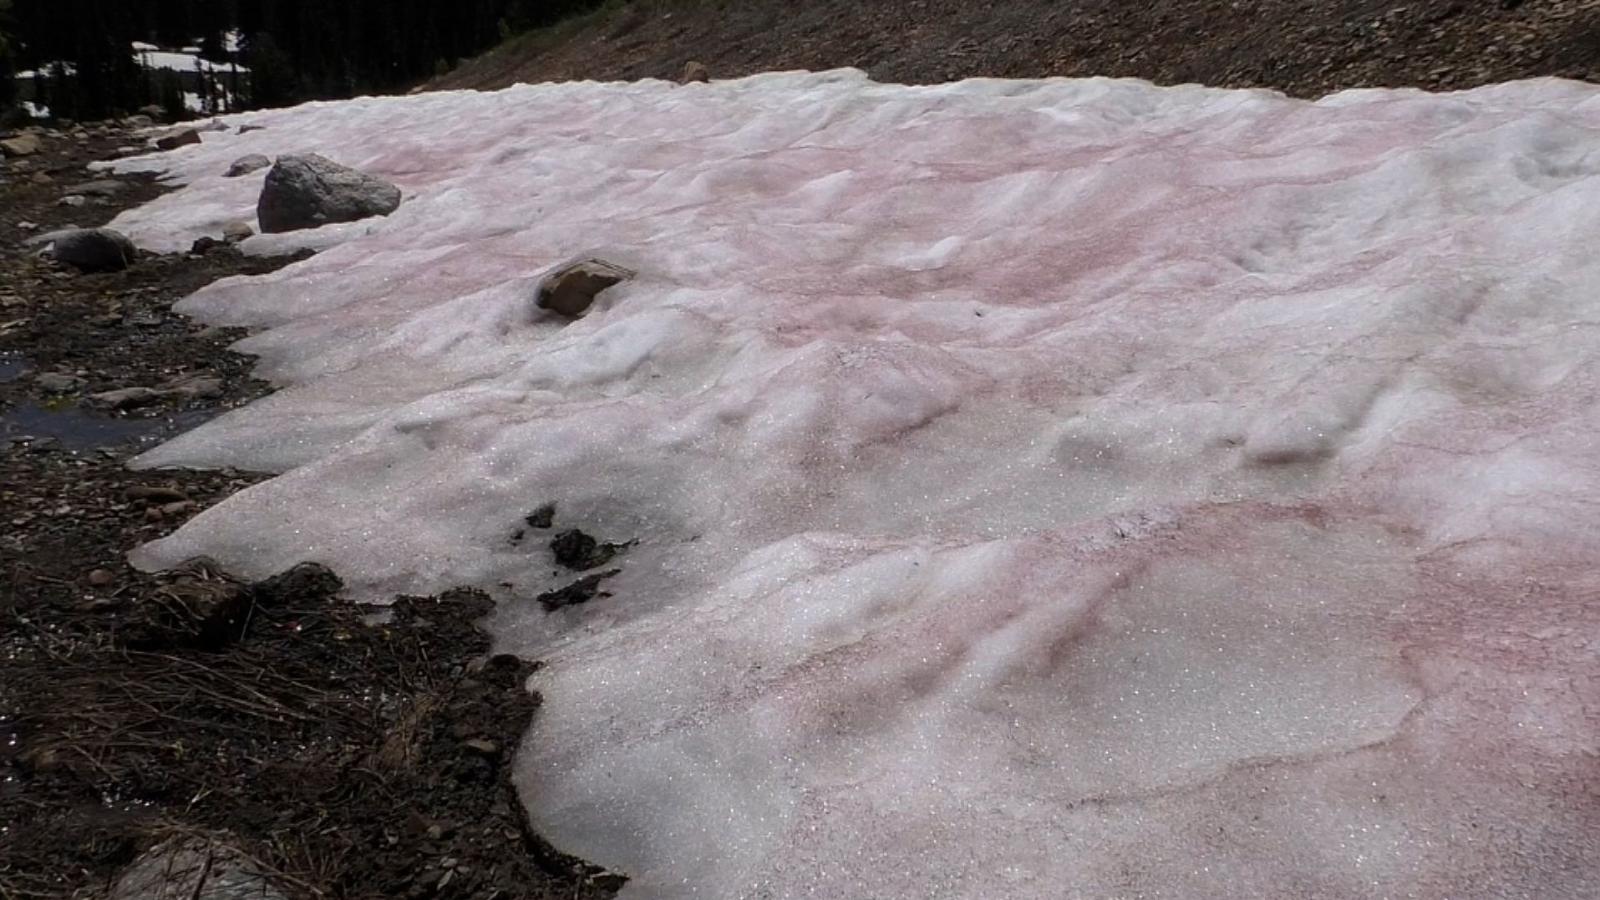 “Watermelon snow”, what is it and why does it appear?